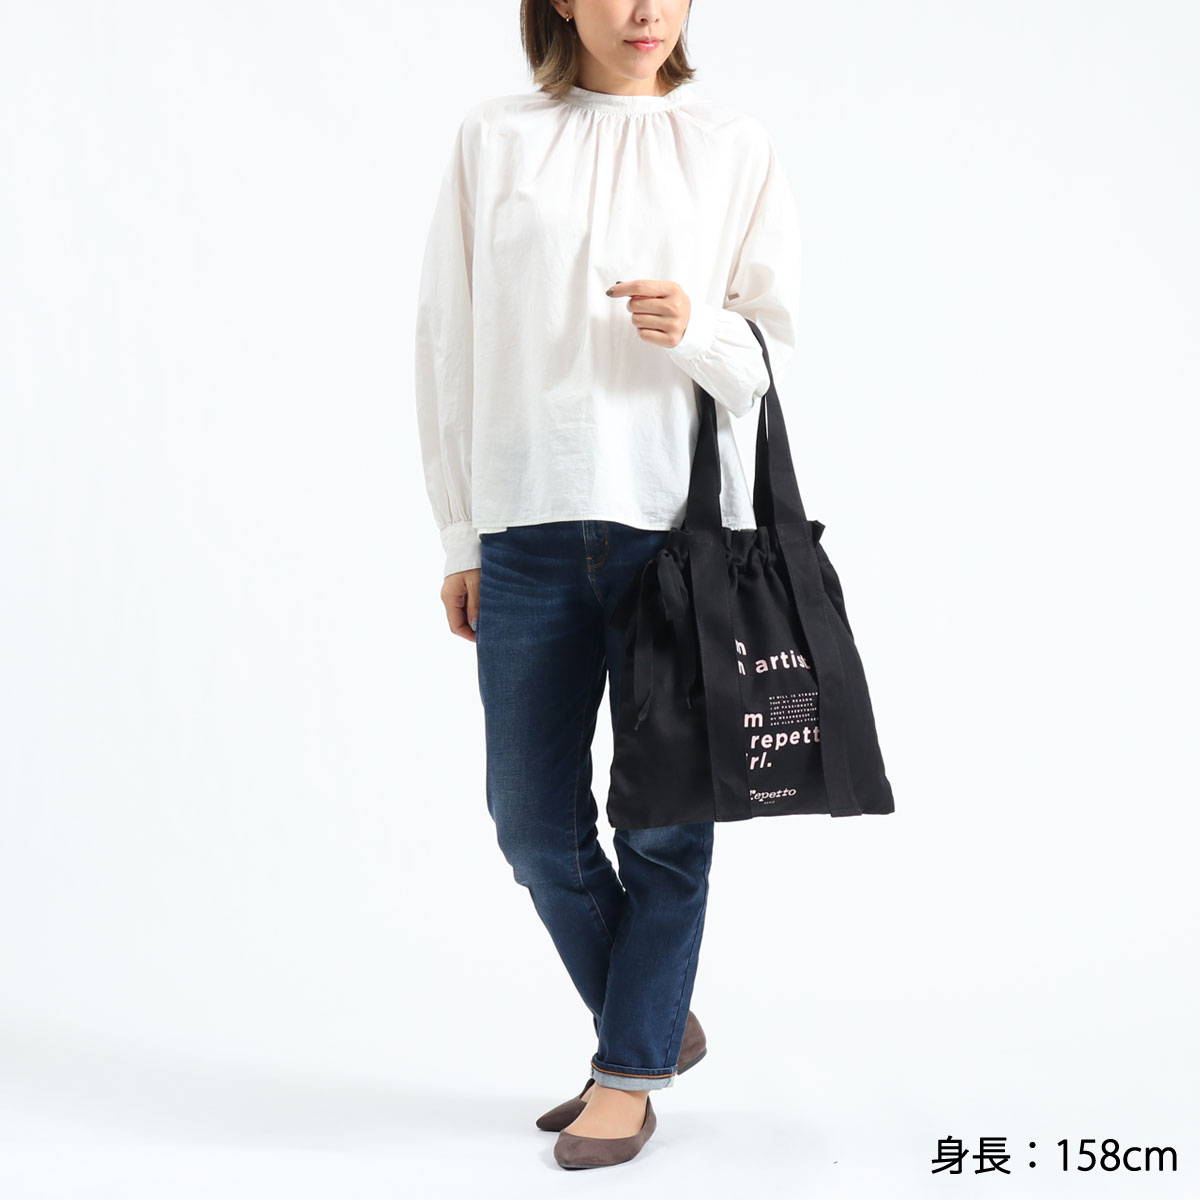 Repetto レペット Rondo tote bag with knots トートバッグ 51204-5-50333